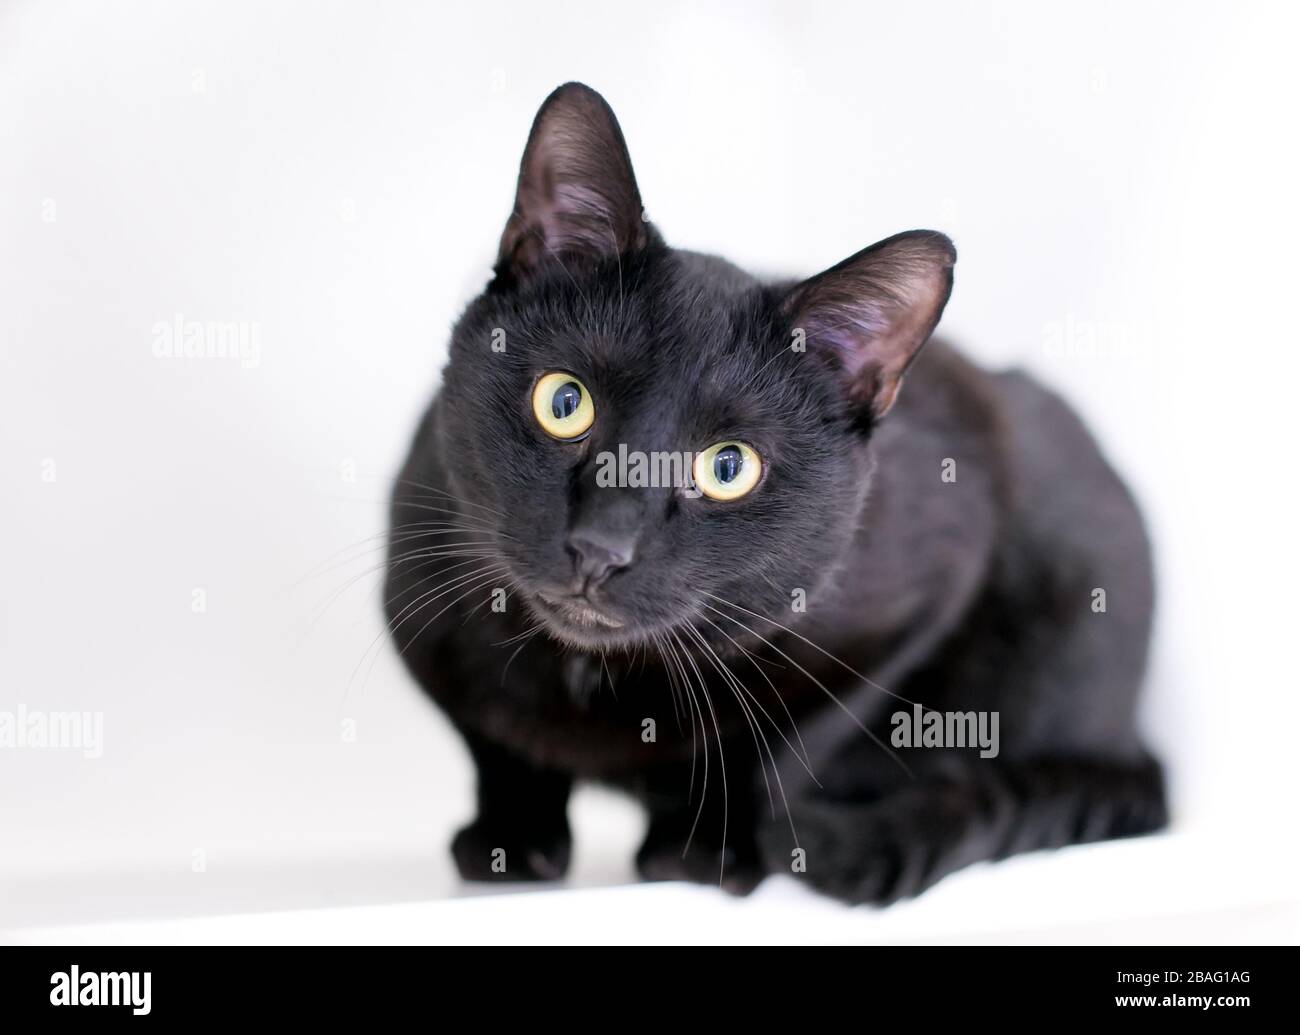 A black domestic shorthair cat with a curious expression looking directly at the camera Stock Photo